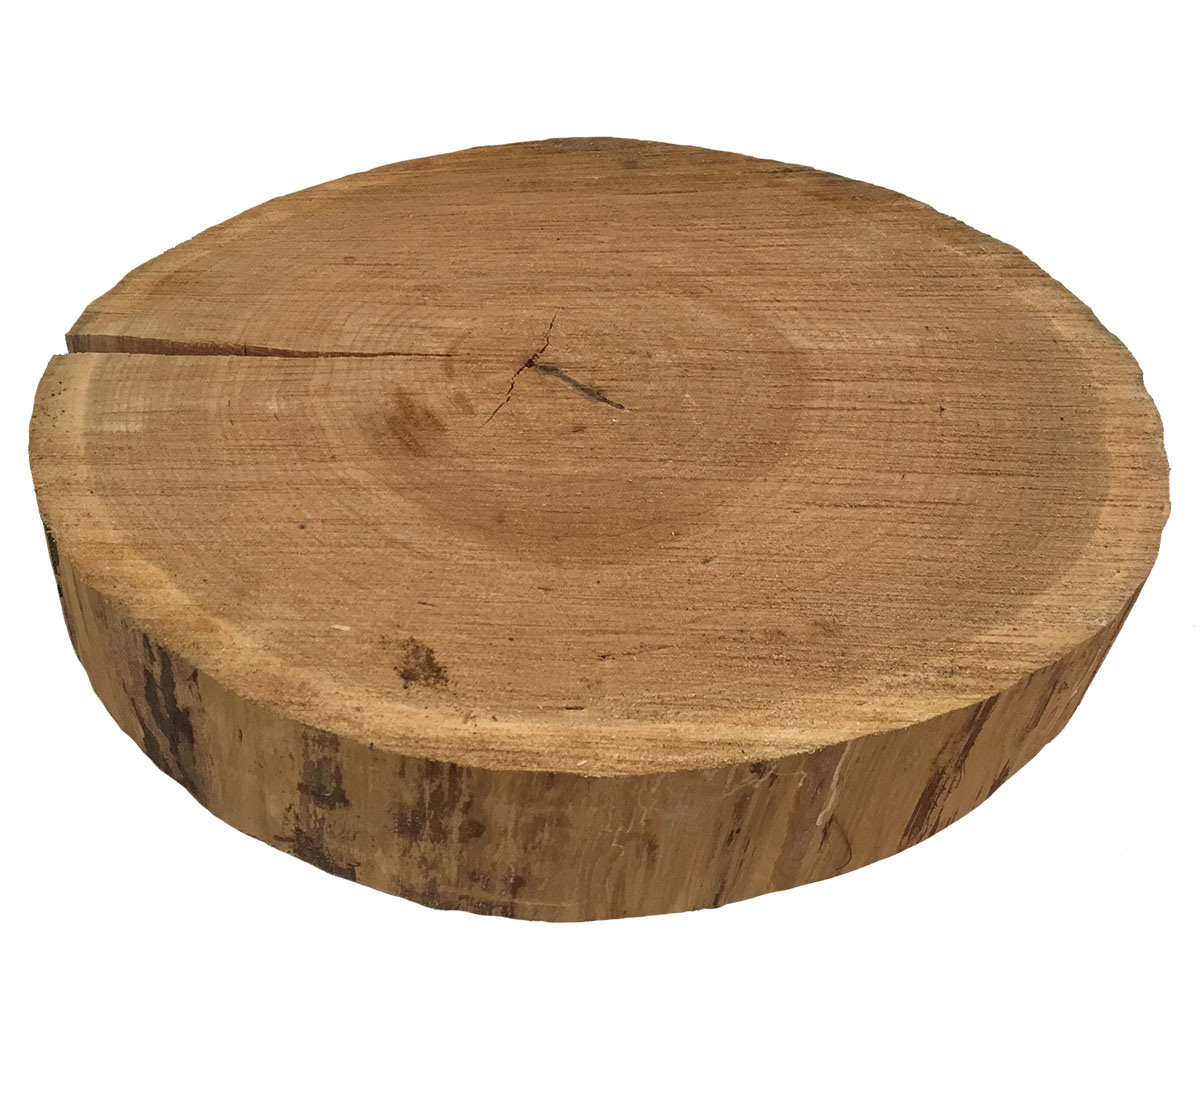 Wood Disc - 7/8 Diameter x 1/8 Thick 7/8 inch wood discs [#70B] - $0.1500 :  Casey's Wood Products, We at Casey's have it all - wood dowels, blocks,  balls, toy wheels